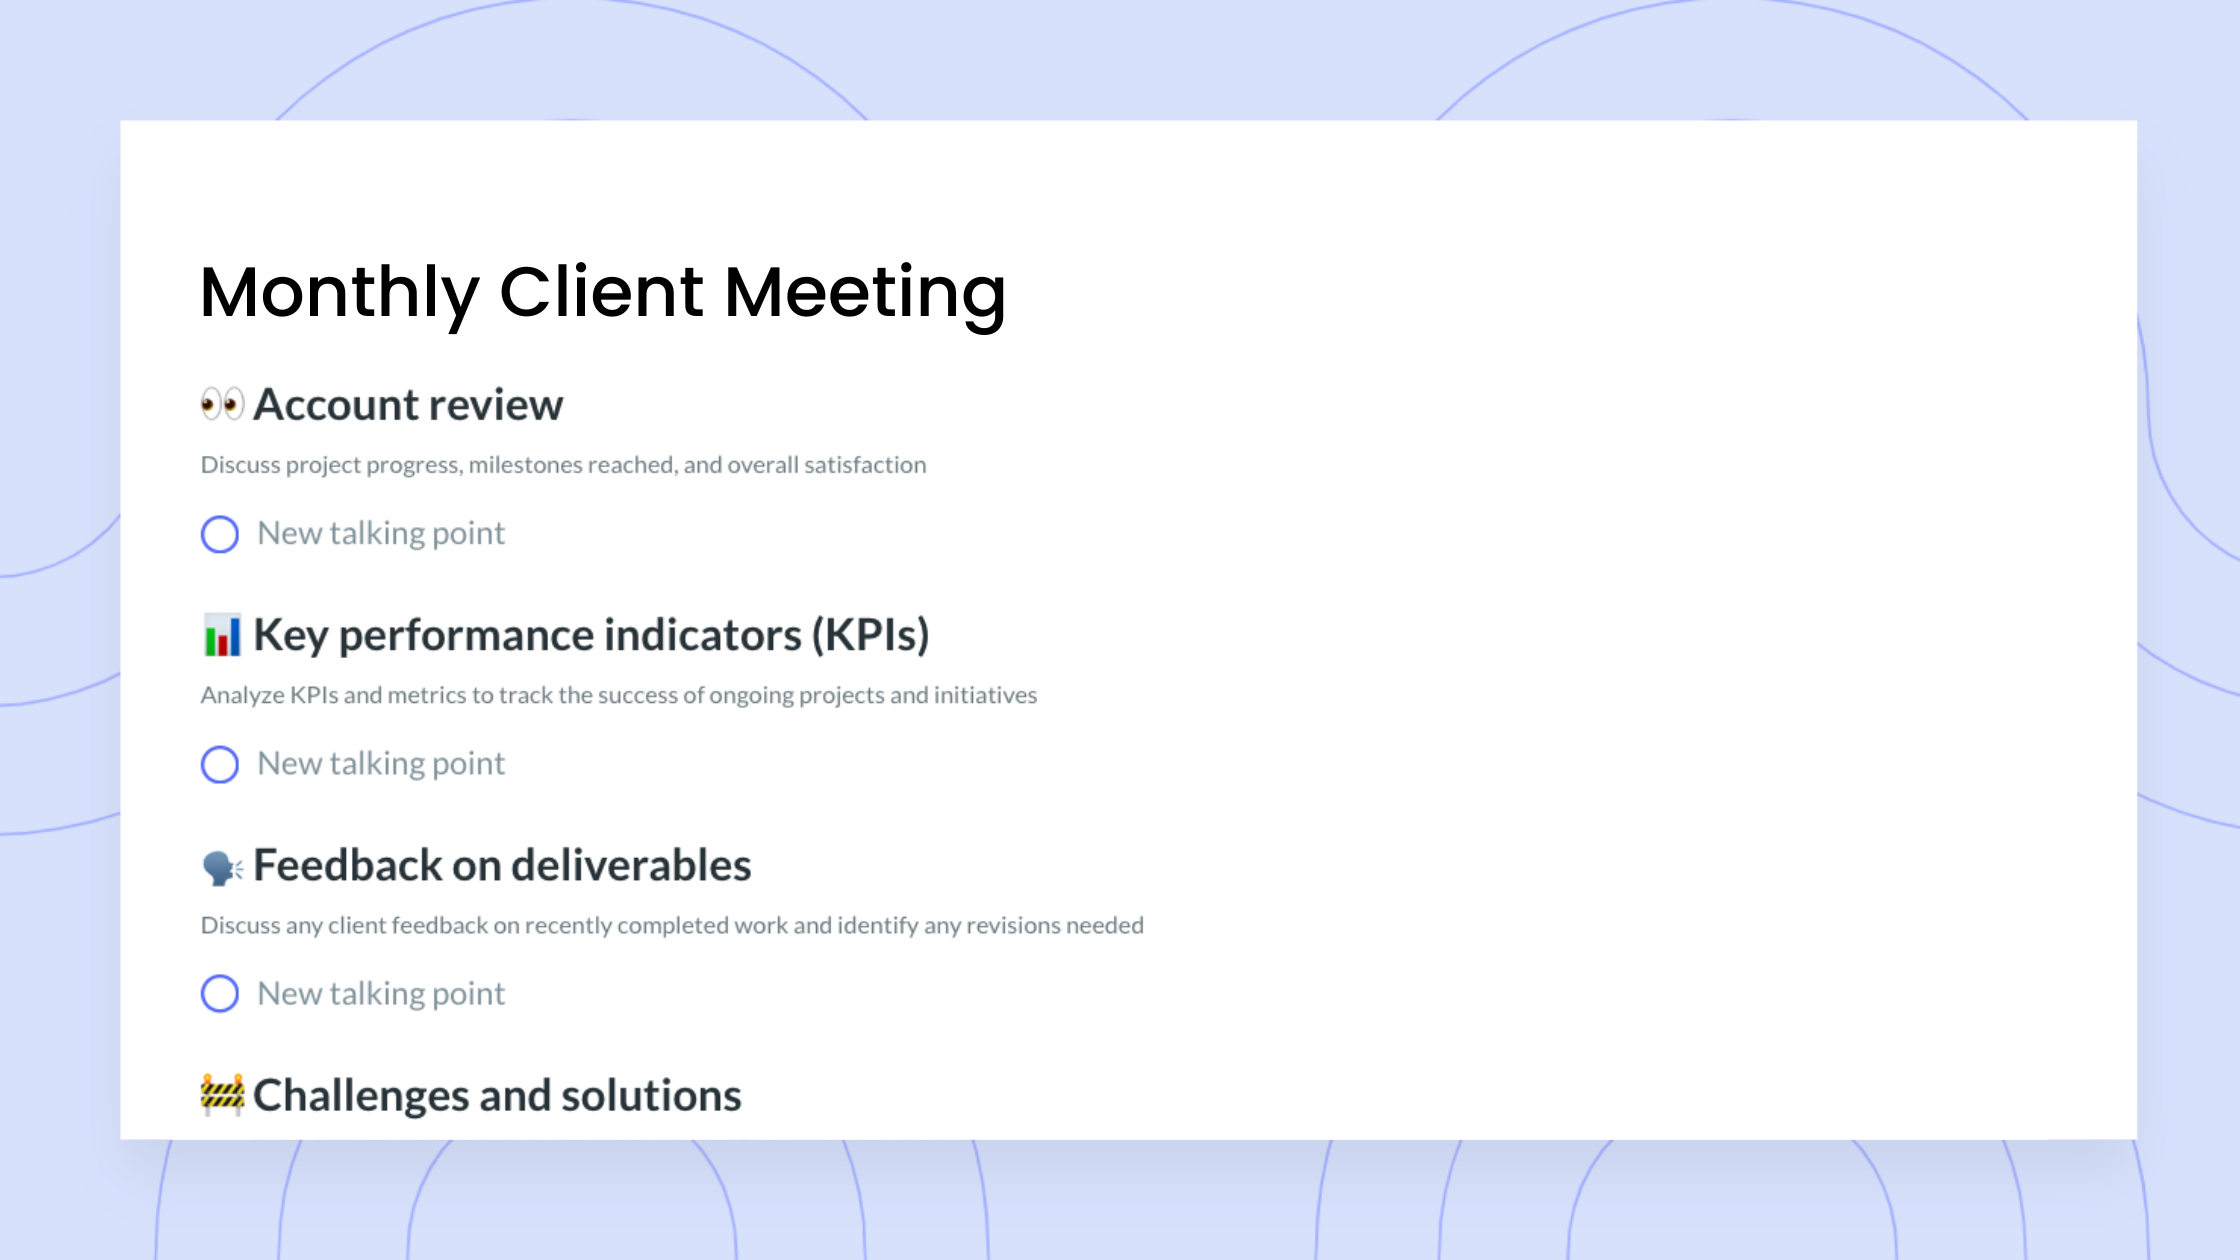 Monthly Client Meeting Agenda